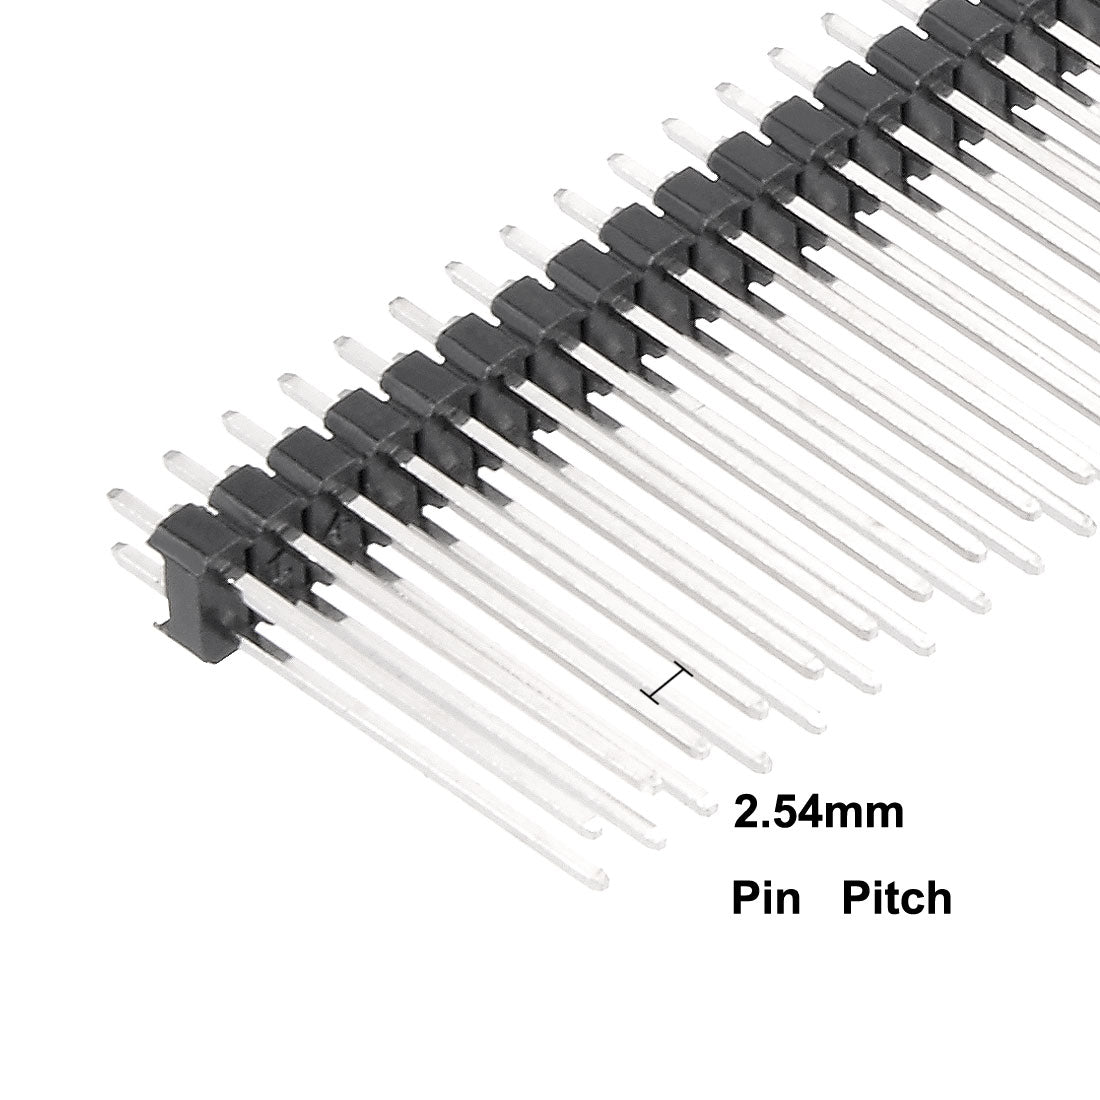 uxcell Uxcell 5Pcs 2.54mm Pitch 40-Pin 23mm Length Double Row Straight Connector Pin Header Strip for Arduino Prototype Shield